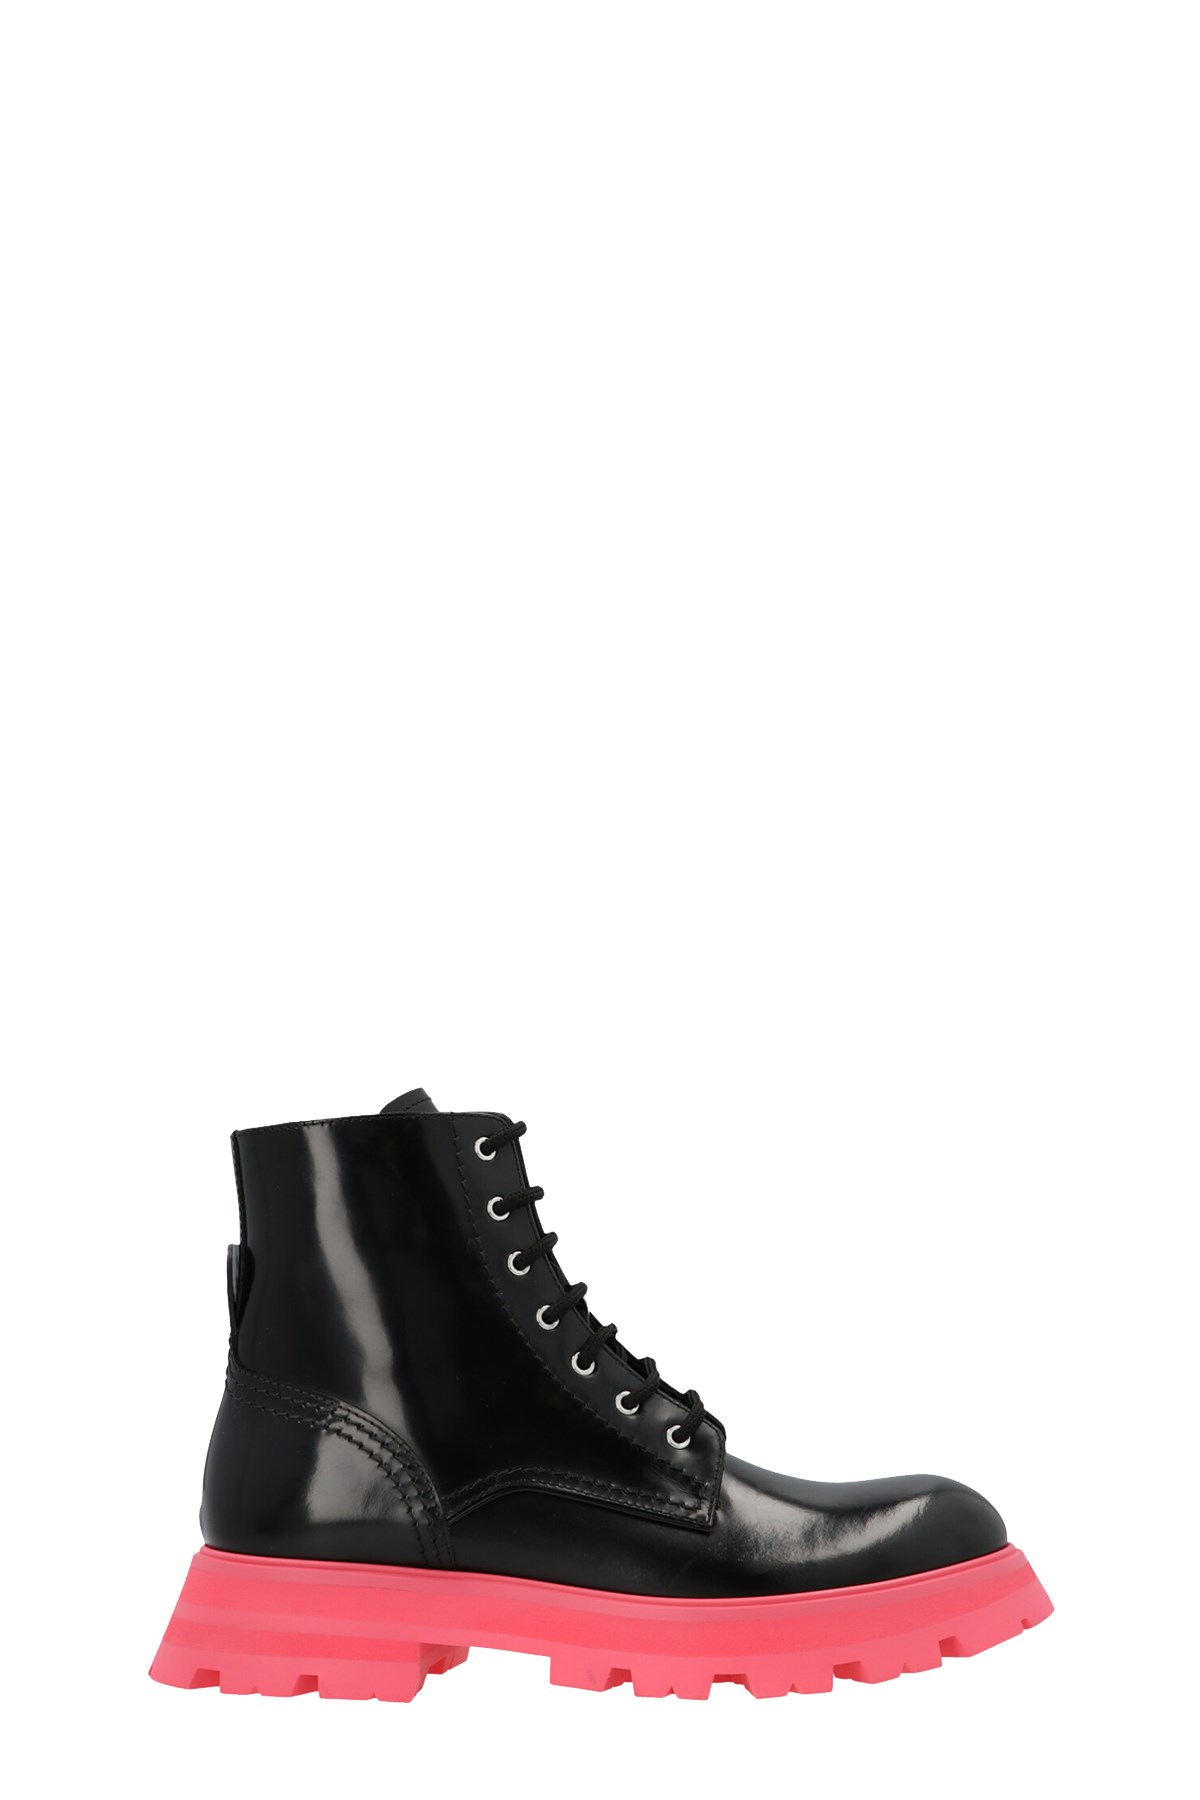 ALEXANDER MCQUEEN Brushed Leather Combat Boots